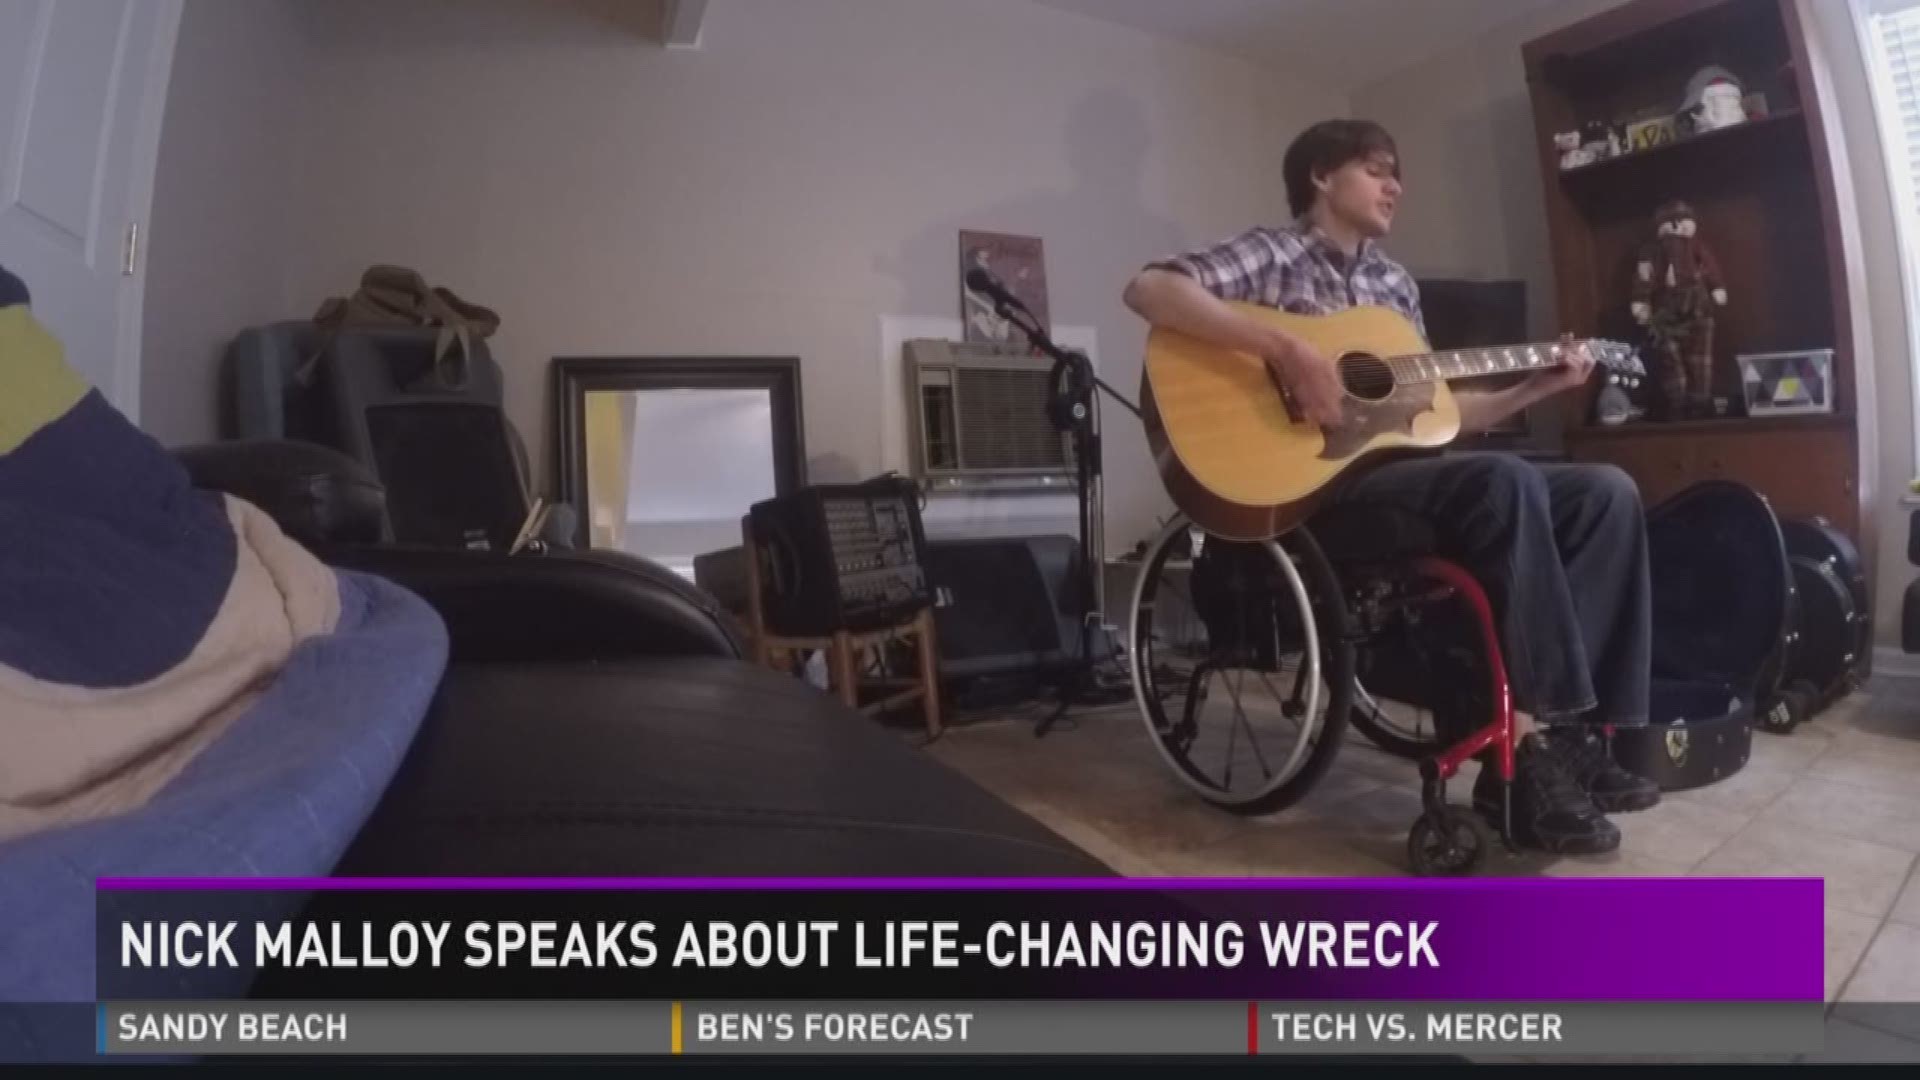 Nick Malloy speaks about life-changing wreck